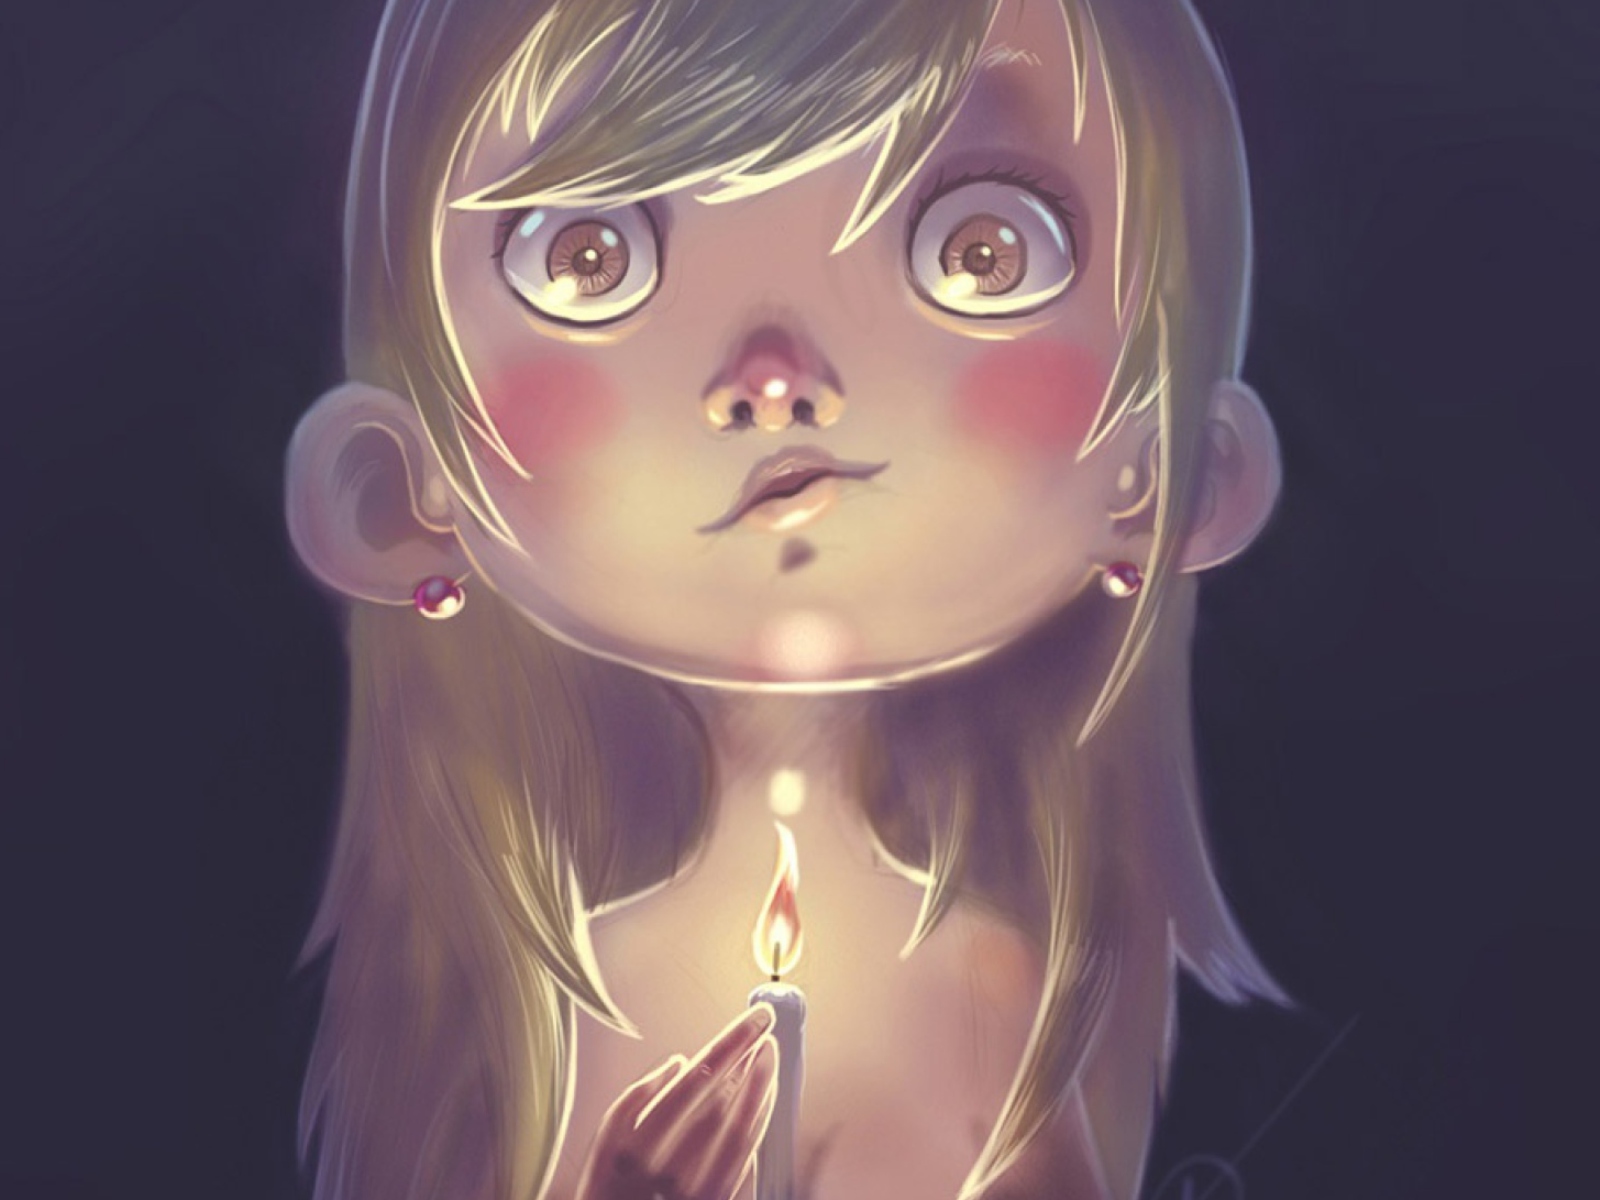 Das Girl With Candle Wallpaper 1600x1200